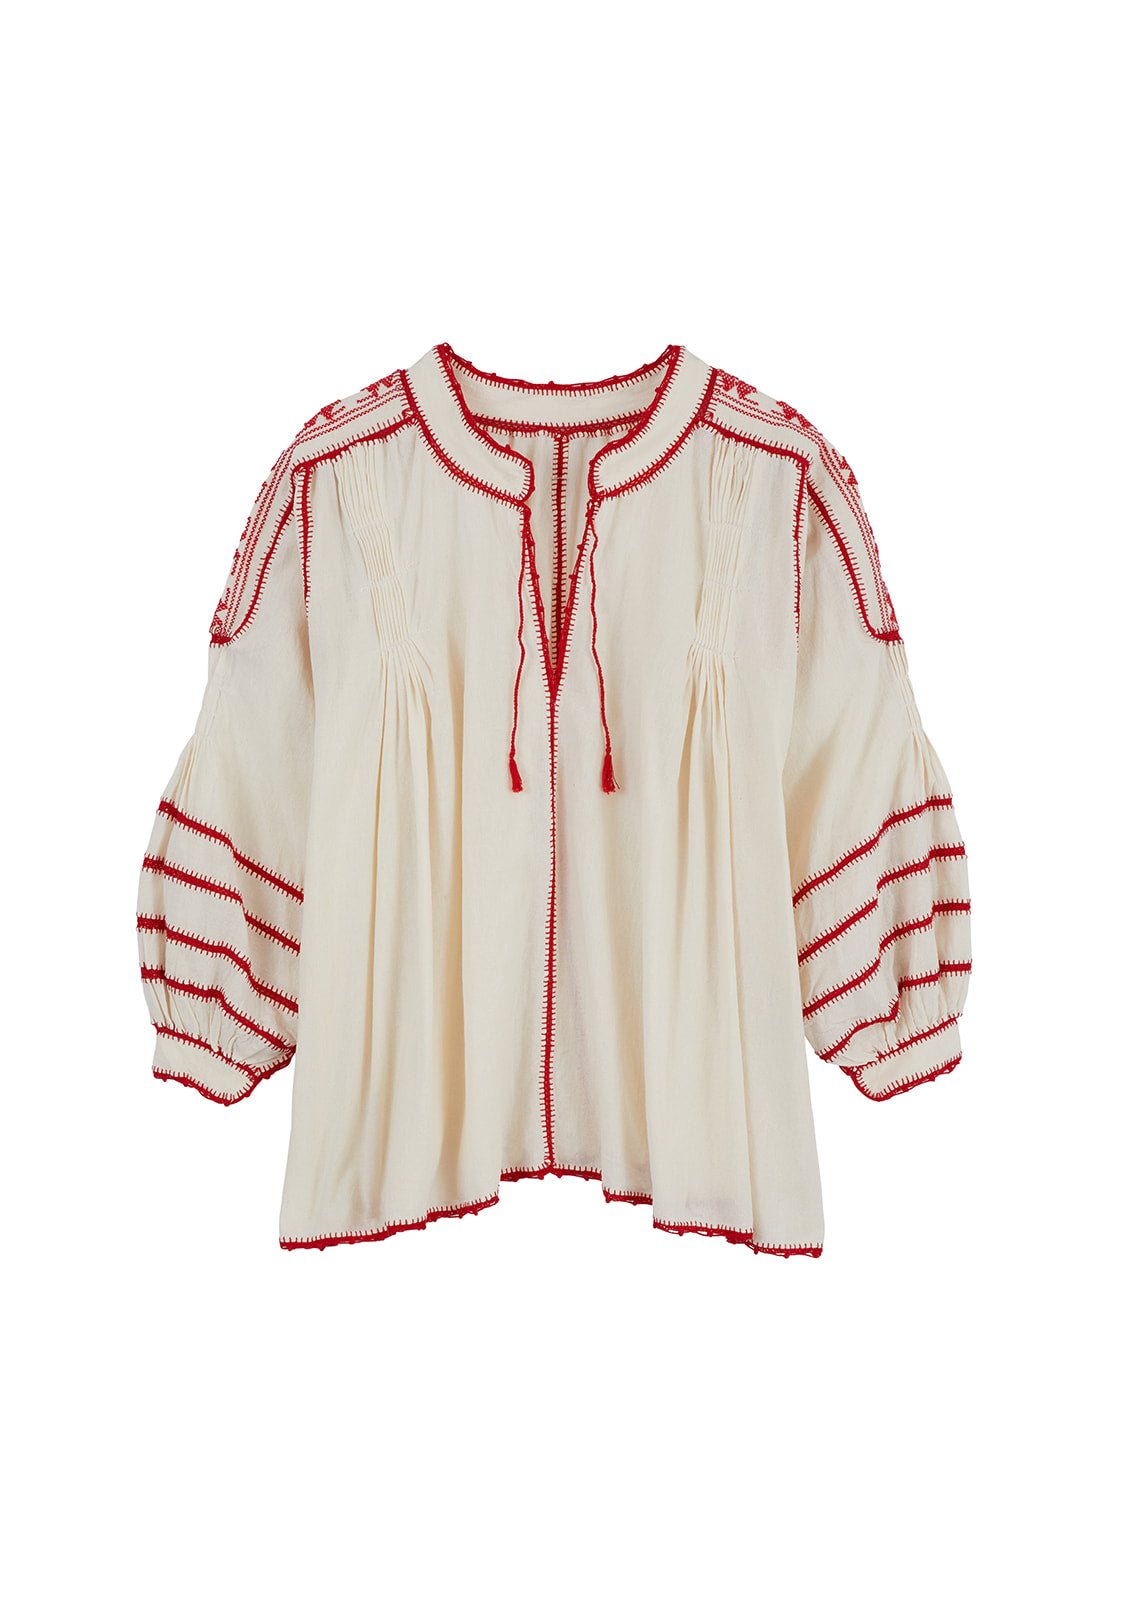 Amorcita Mexican Top - Ivory, Red by Larkin Lane